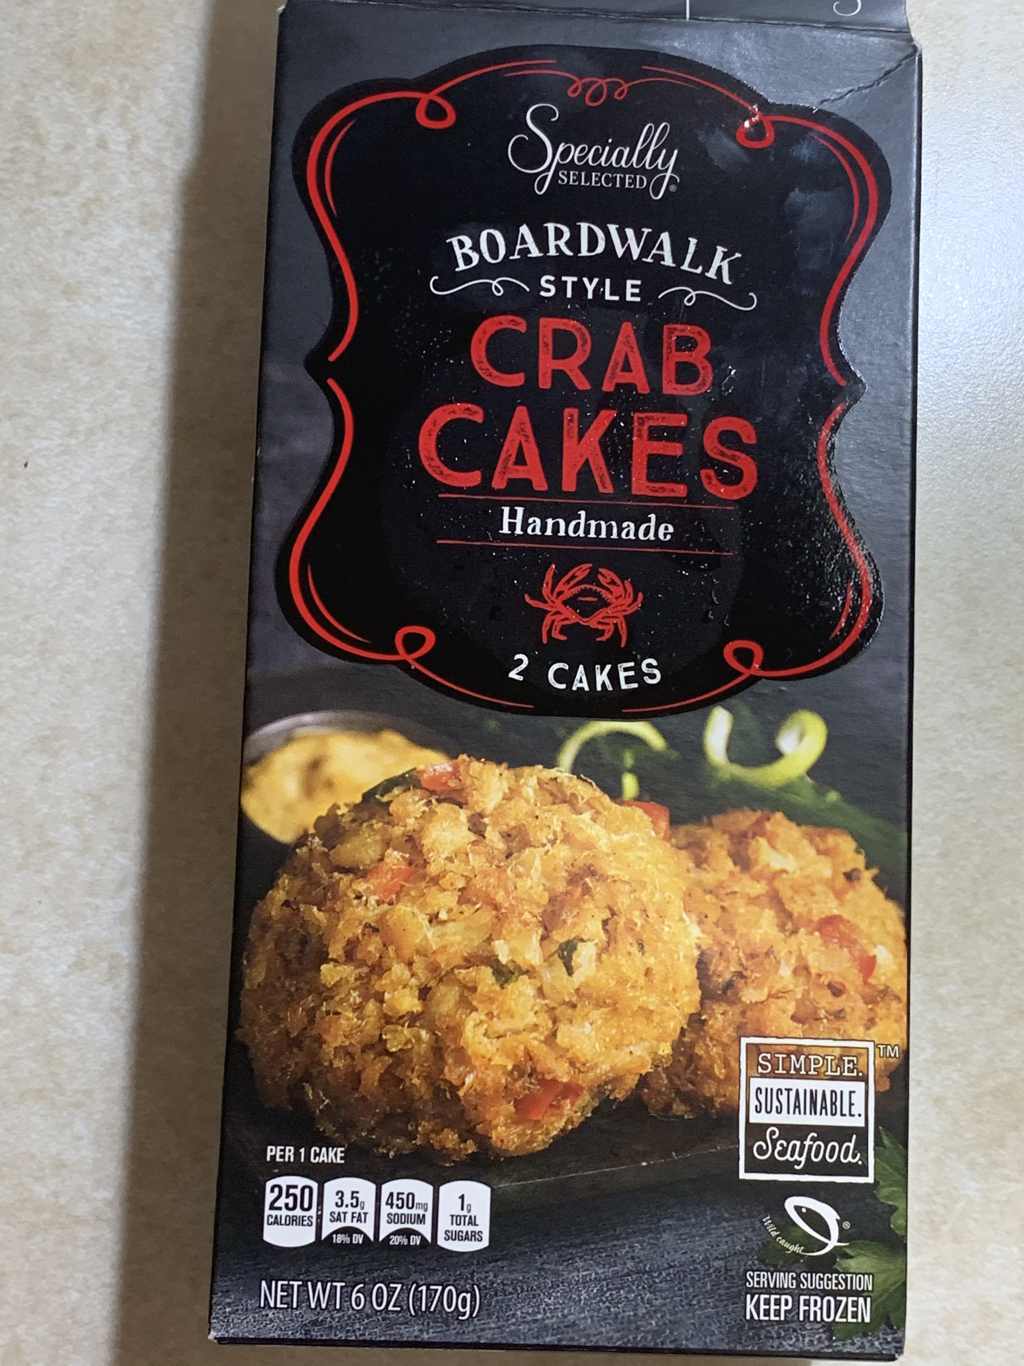 Specially Selected Boardwalk Crab Cakes Aldi Review